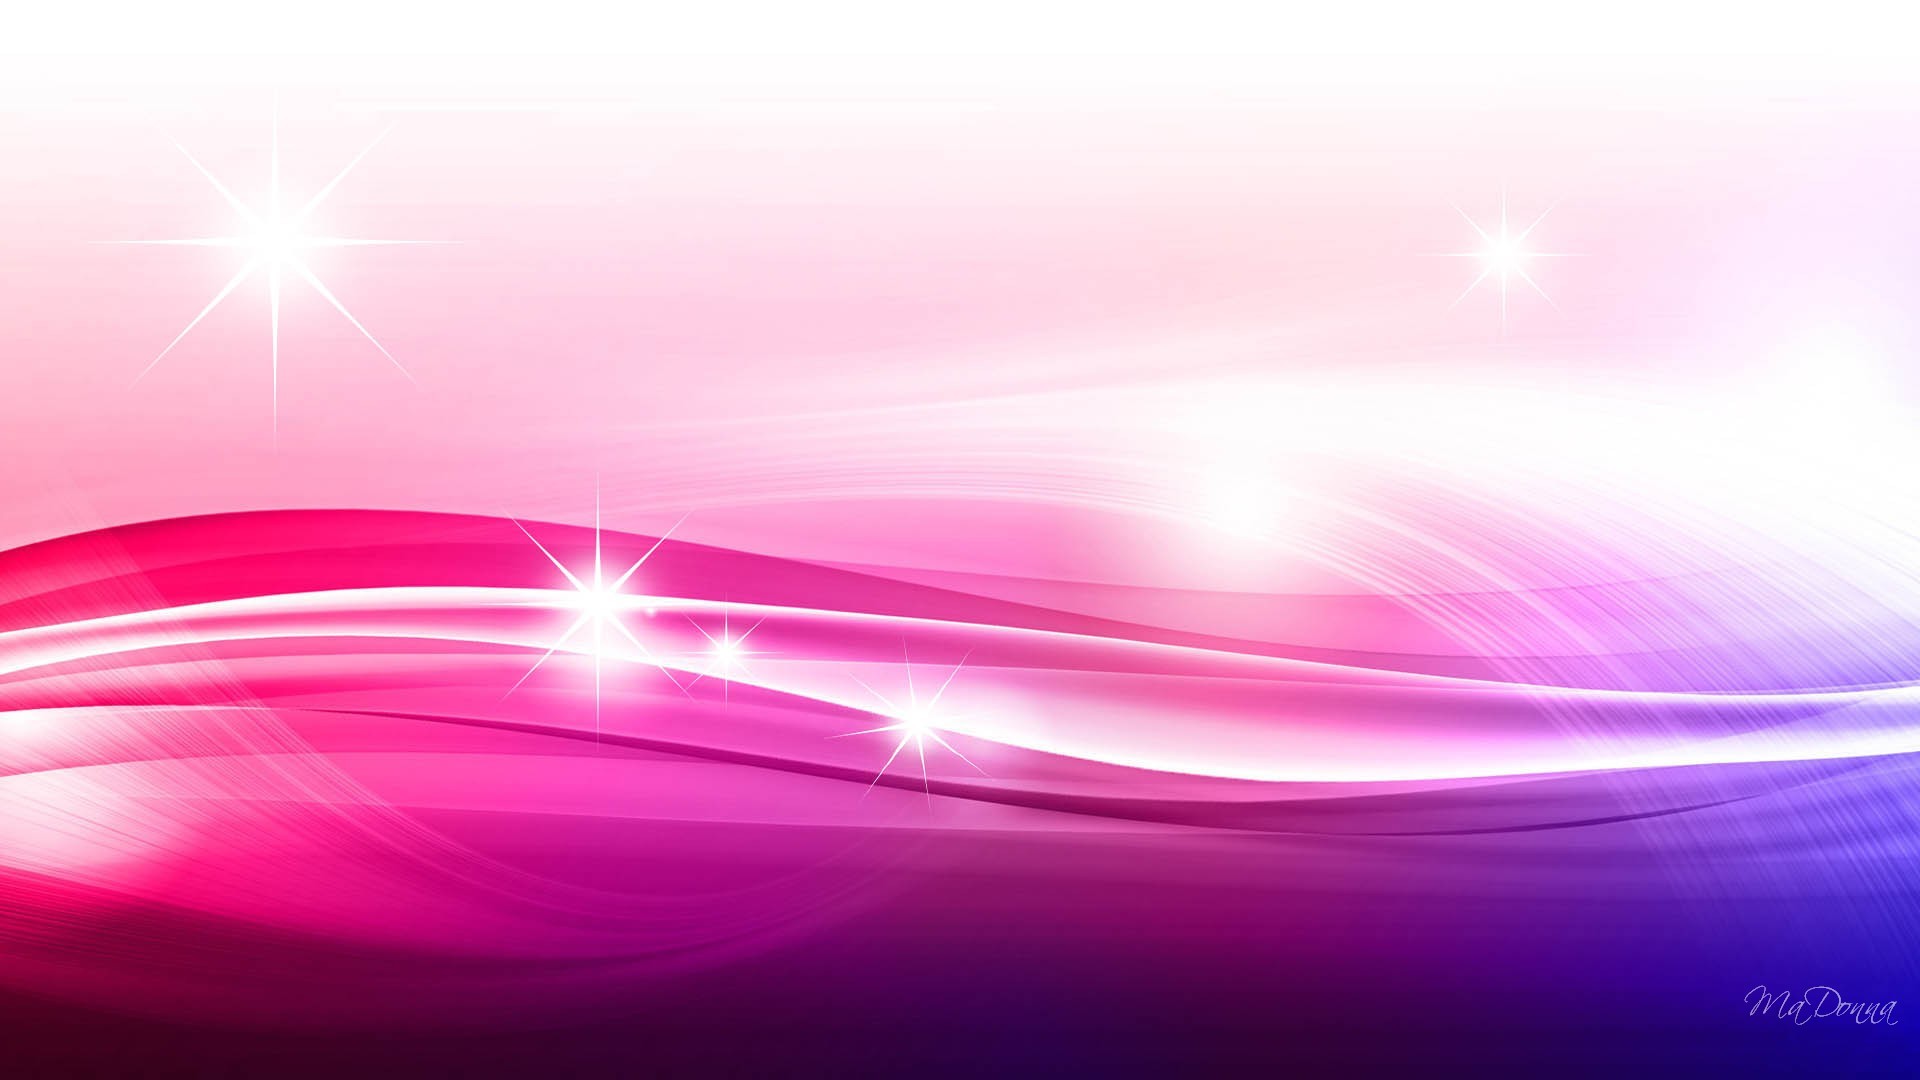 1920x1080 Stars Sparkle Swish Pink Backgrounds for Presentation - PPT Backgrounds  Templates